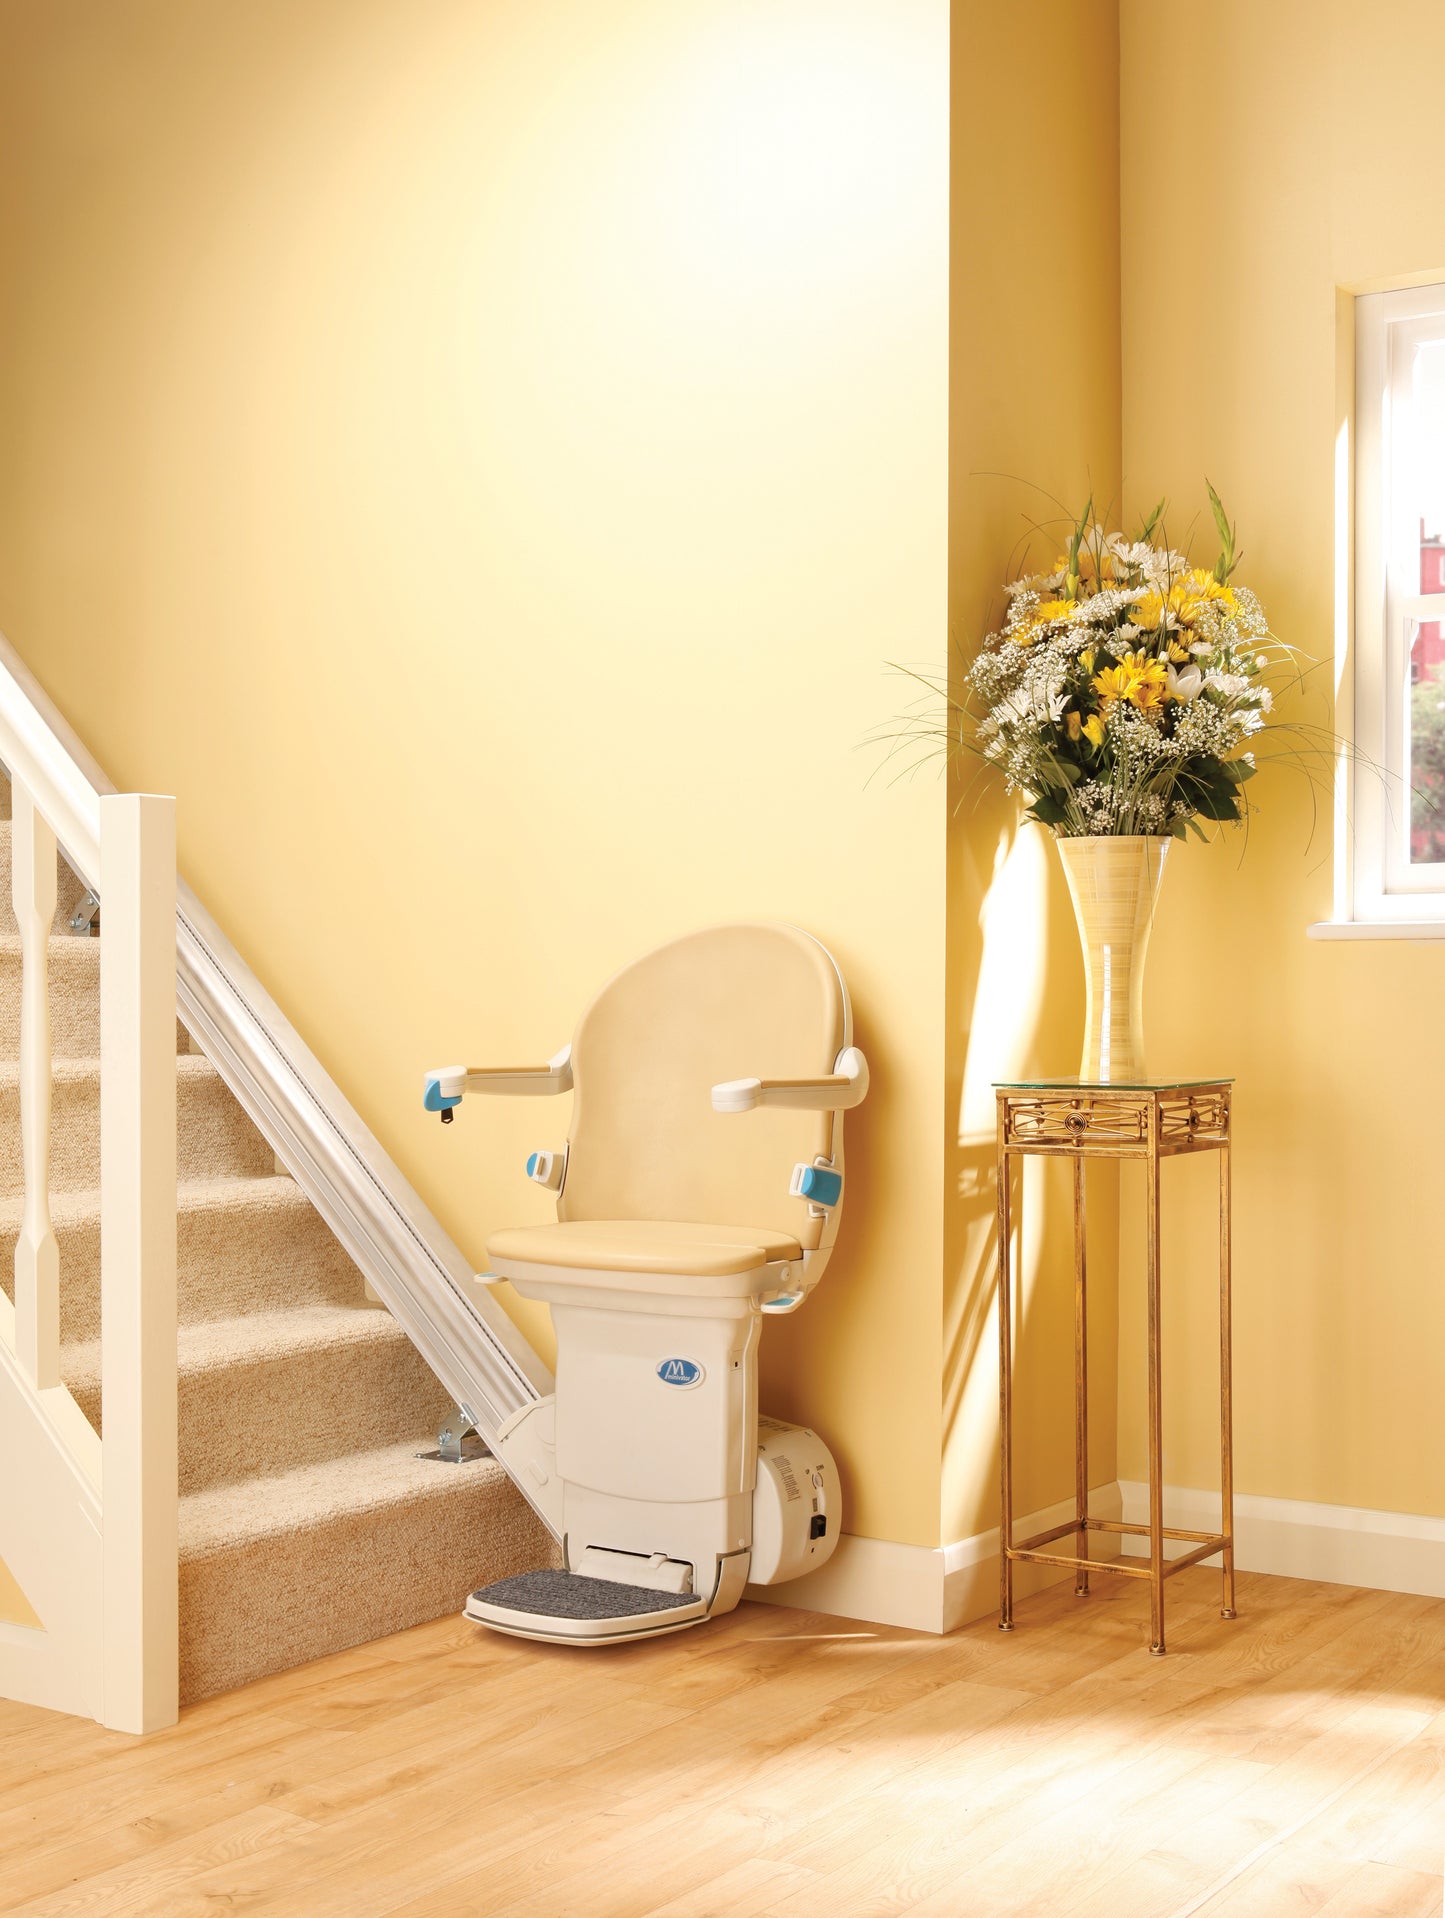 Companion Stairlifts